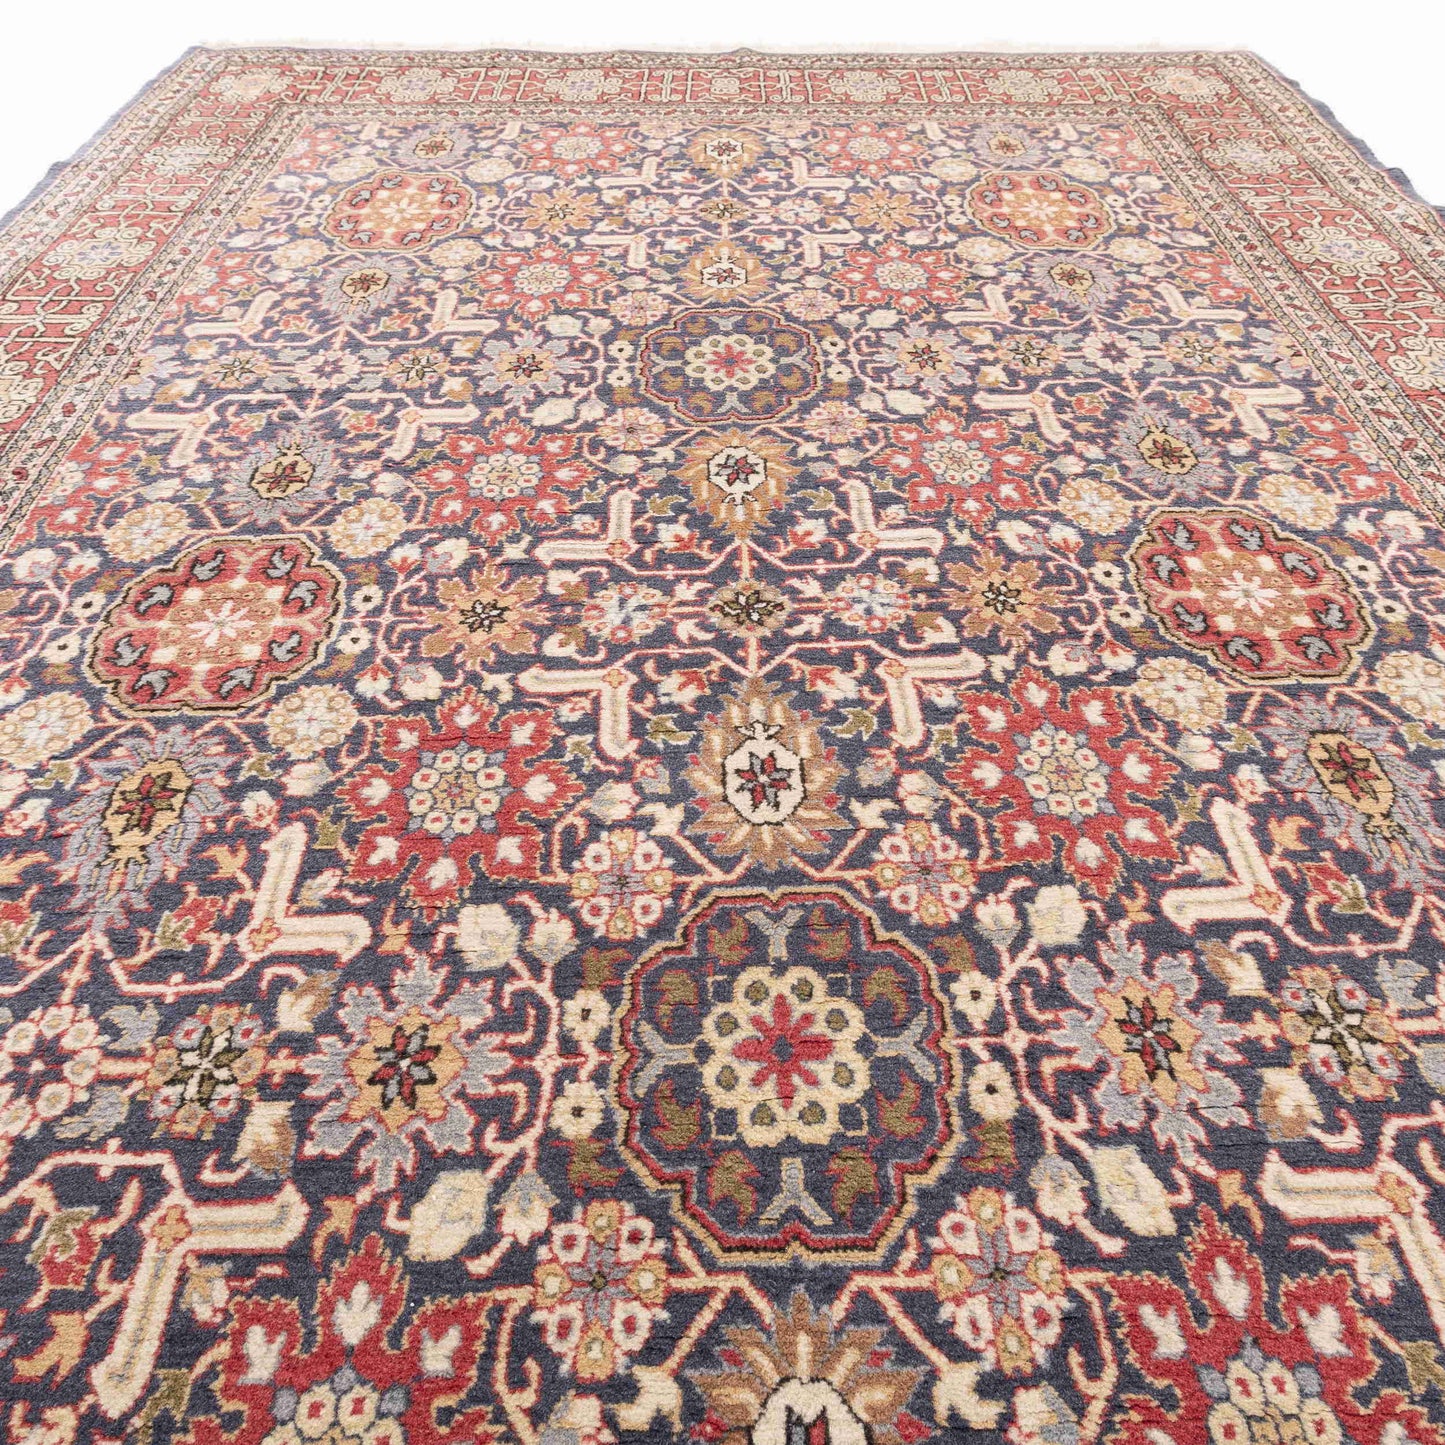 Oriental Rug Hereke Hand Knotted Wool On Cotton 164 X 266 Cm - 5' 5'' X 8' 9'' ER12